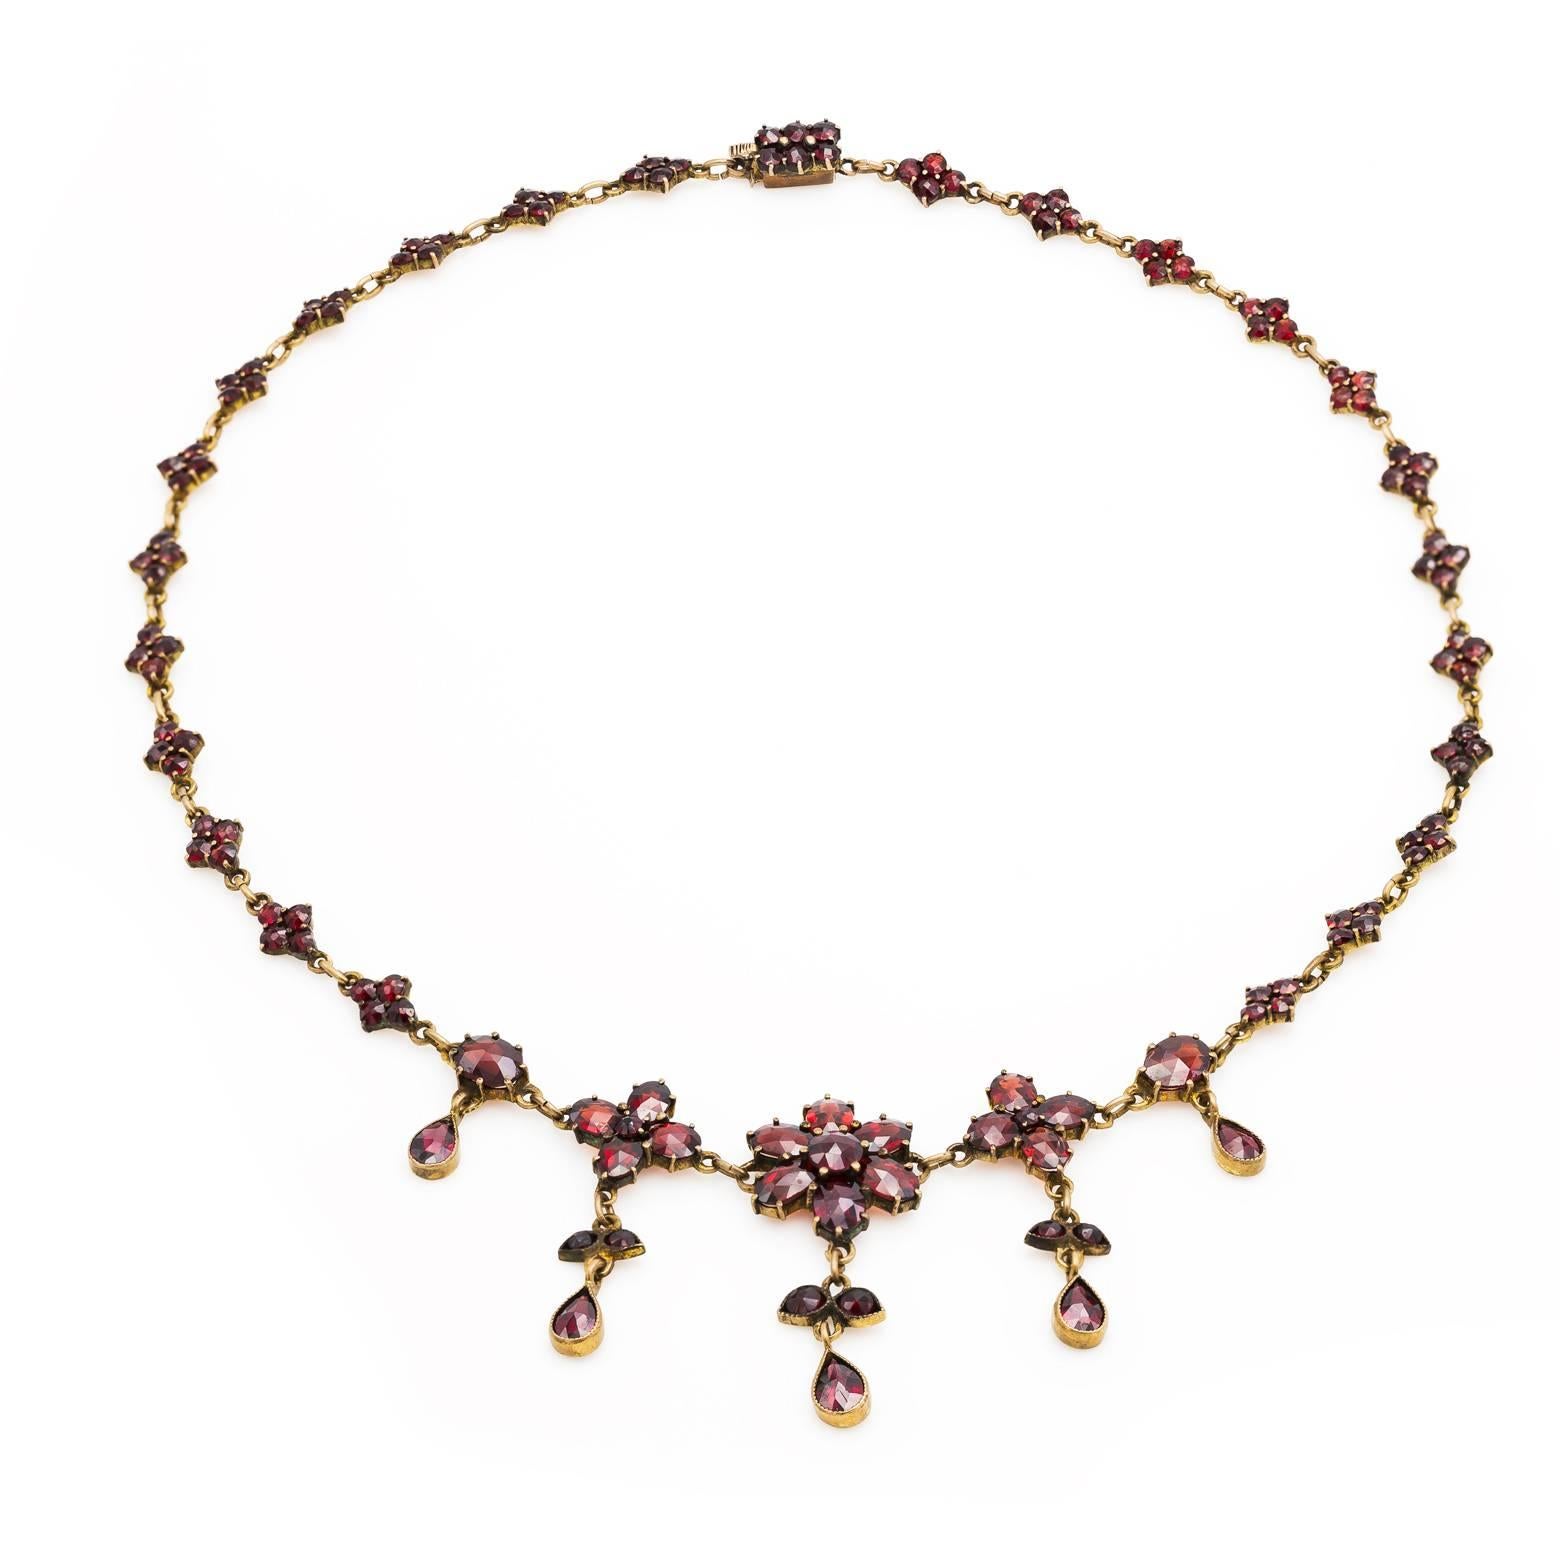 Garnets galore in this beautiful turn of the century necklace in the classic Victorian style. Stunningly brilliant garnets with a floral design in the center create a masterpiece that you'll want to stare at every day. Rich, delicious, fire cinnamon